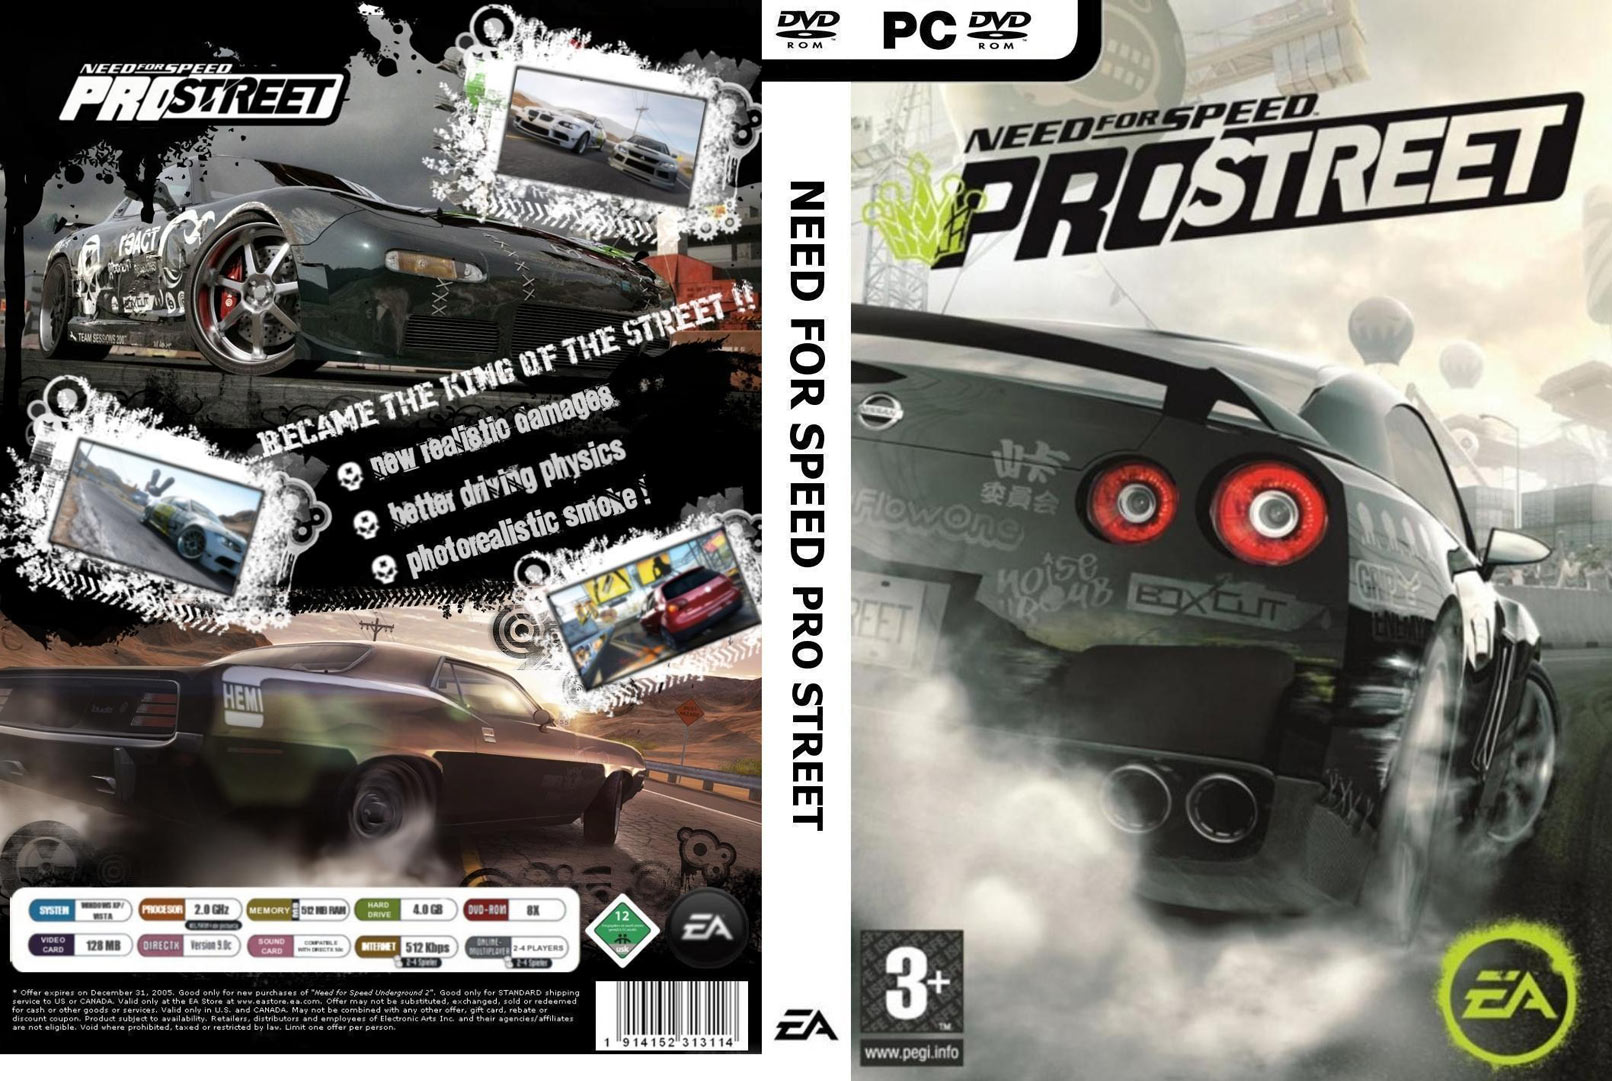 Need for Speed: ProStreet - DVD obal 2